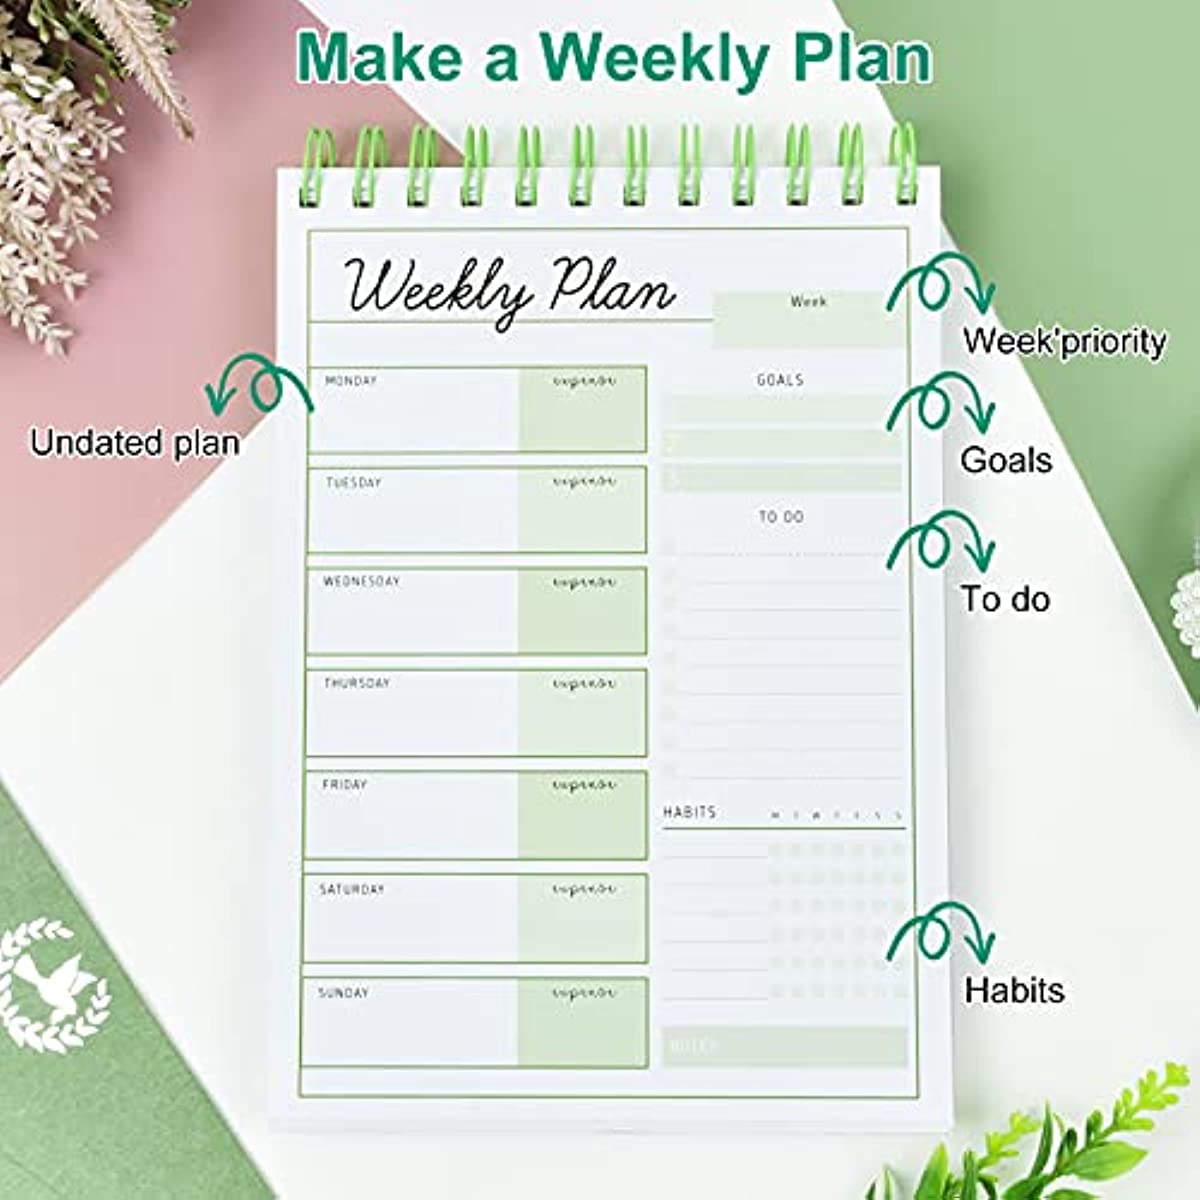 Simplified Greenery To Do List Notebook - Beautiful Daily Planner Easily  Organizes Your Daily Tasks And Boosts Productivity - The Perfect Journal  And